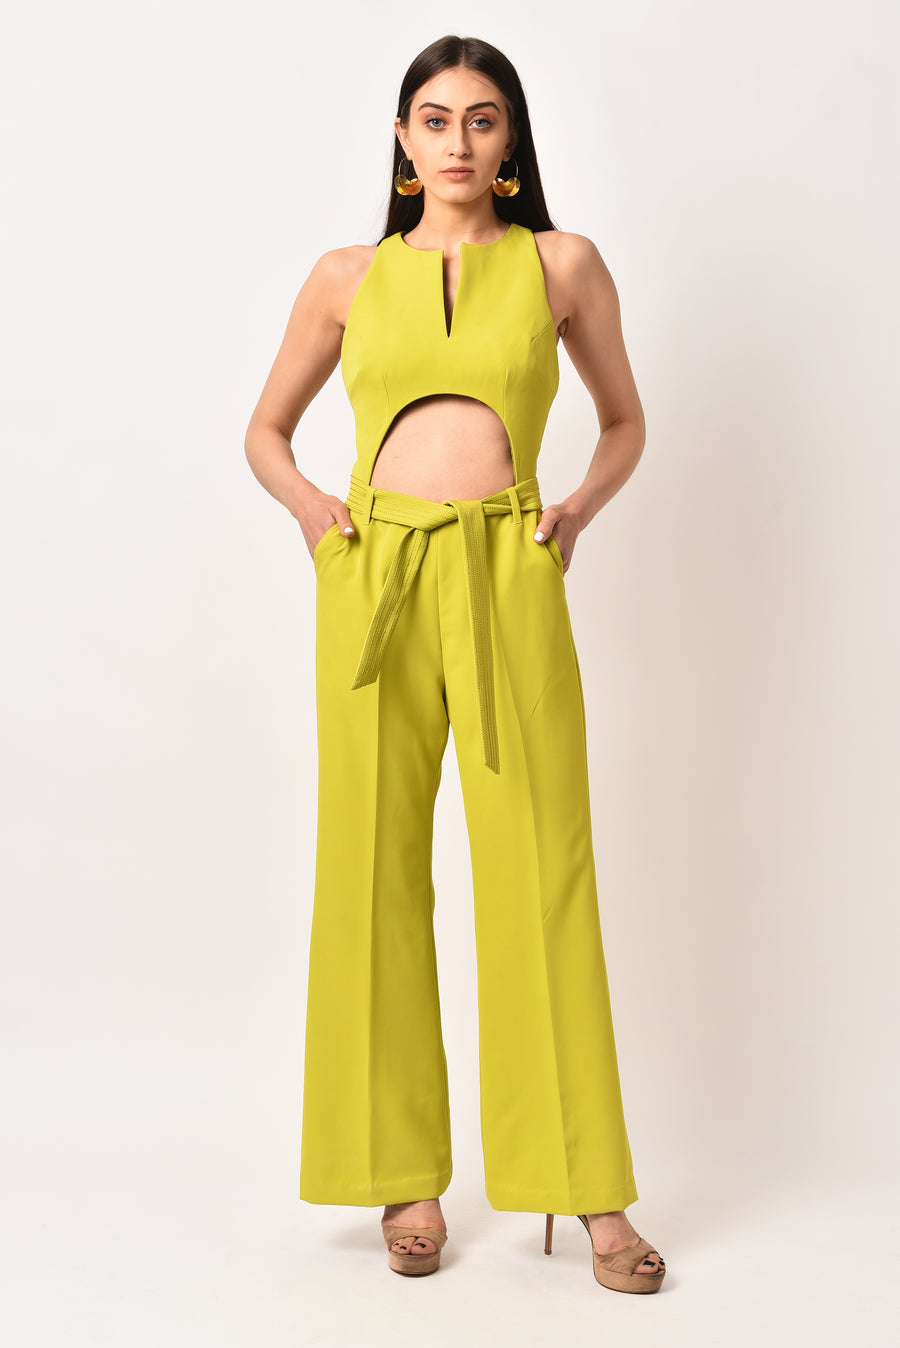 LIME GREEN TIE -UP JUMPSUIT